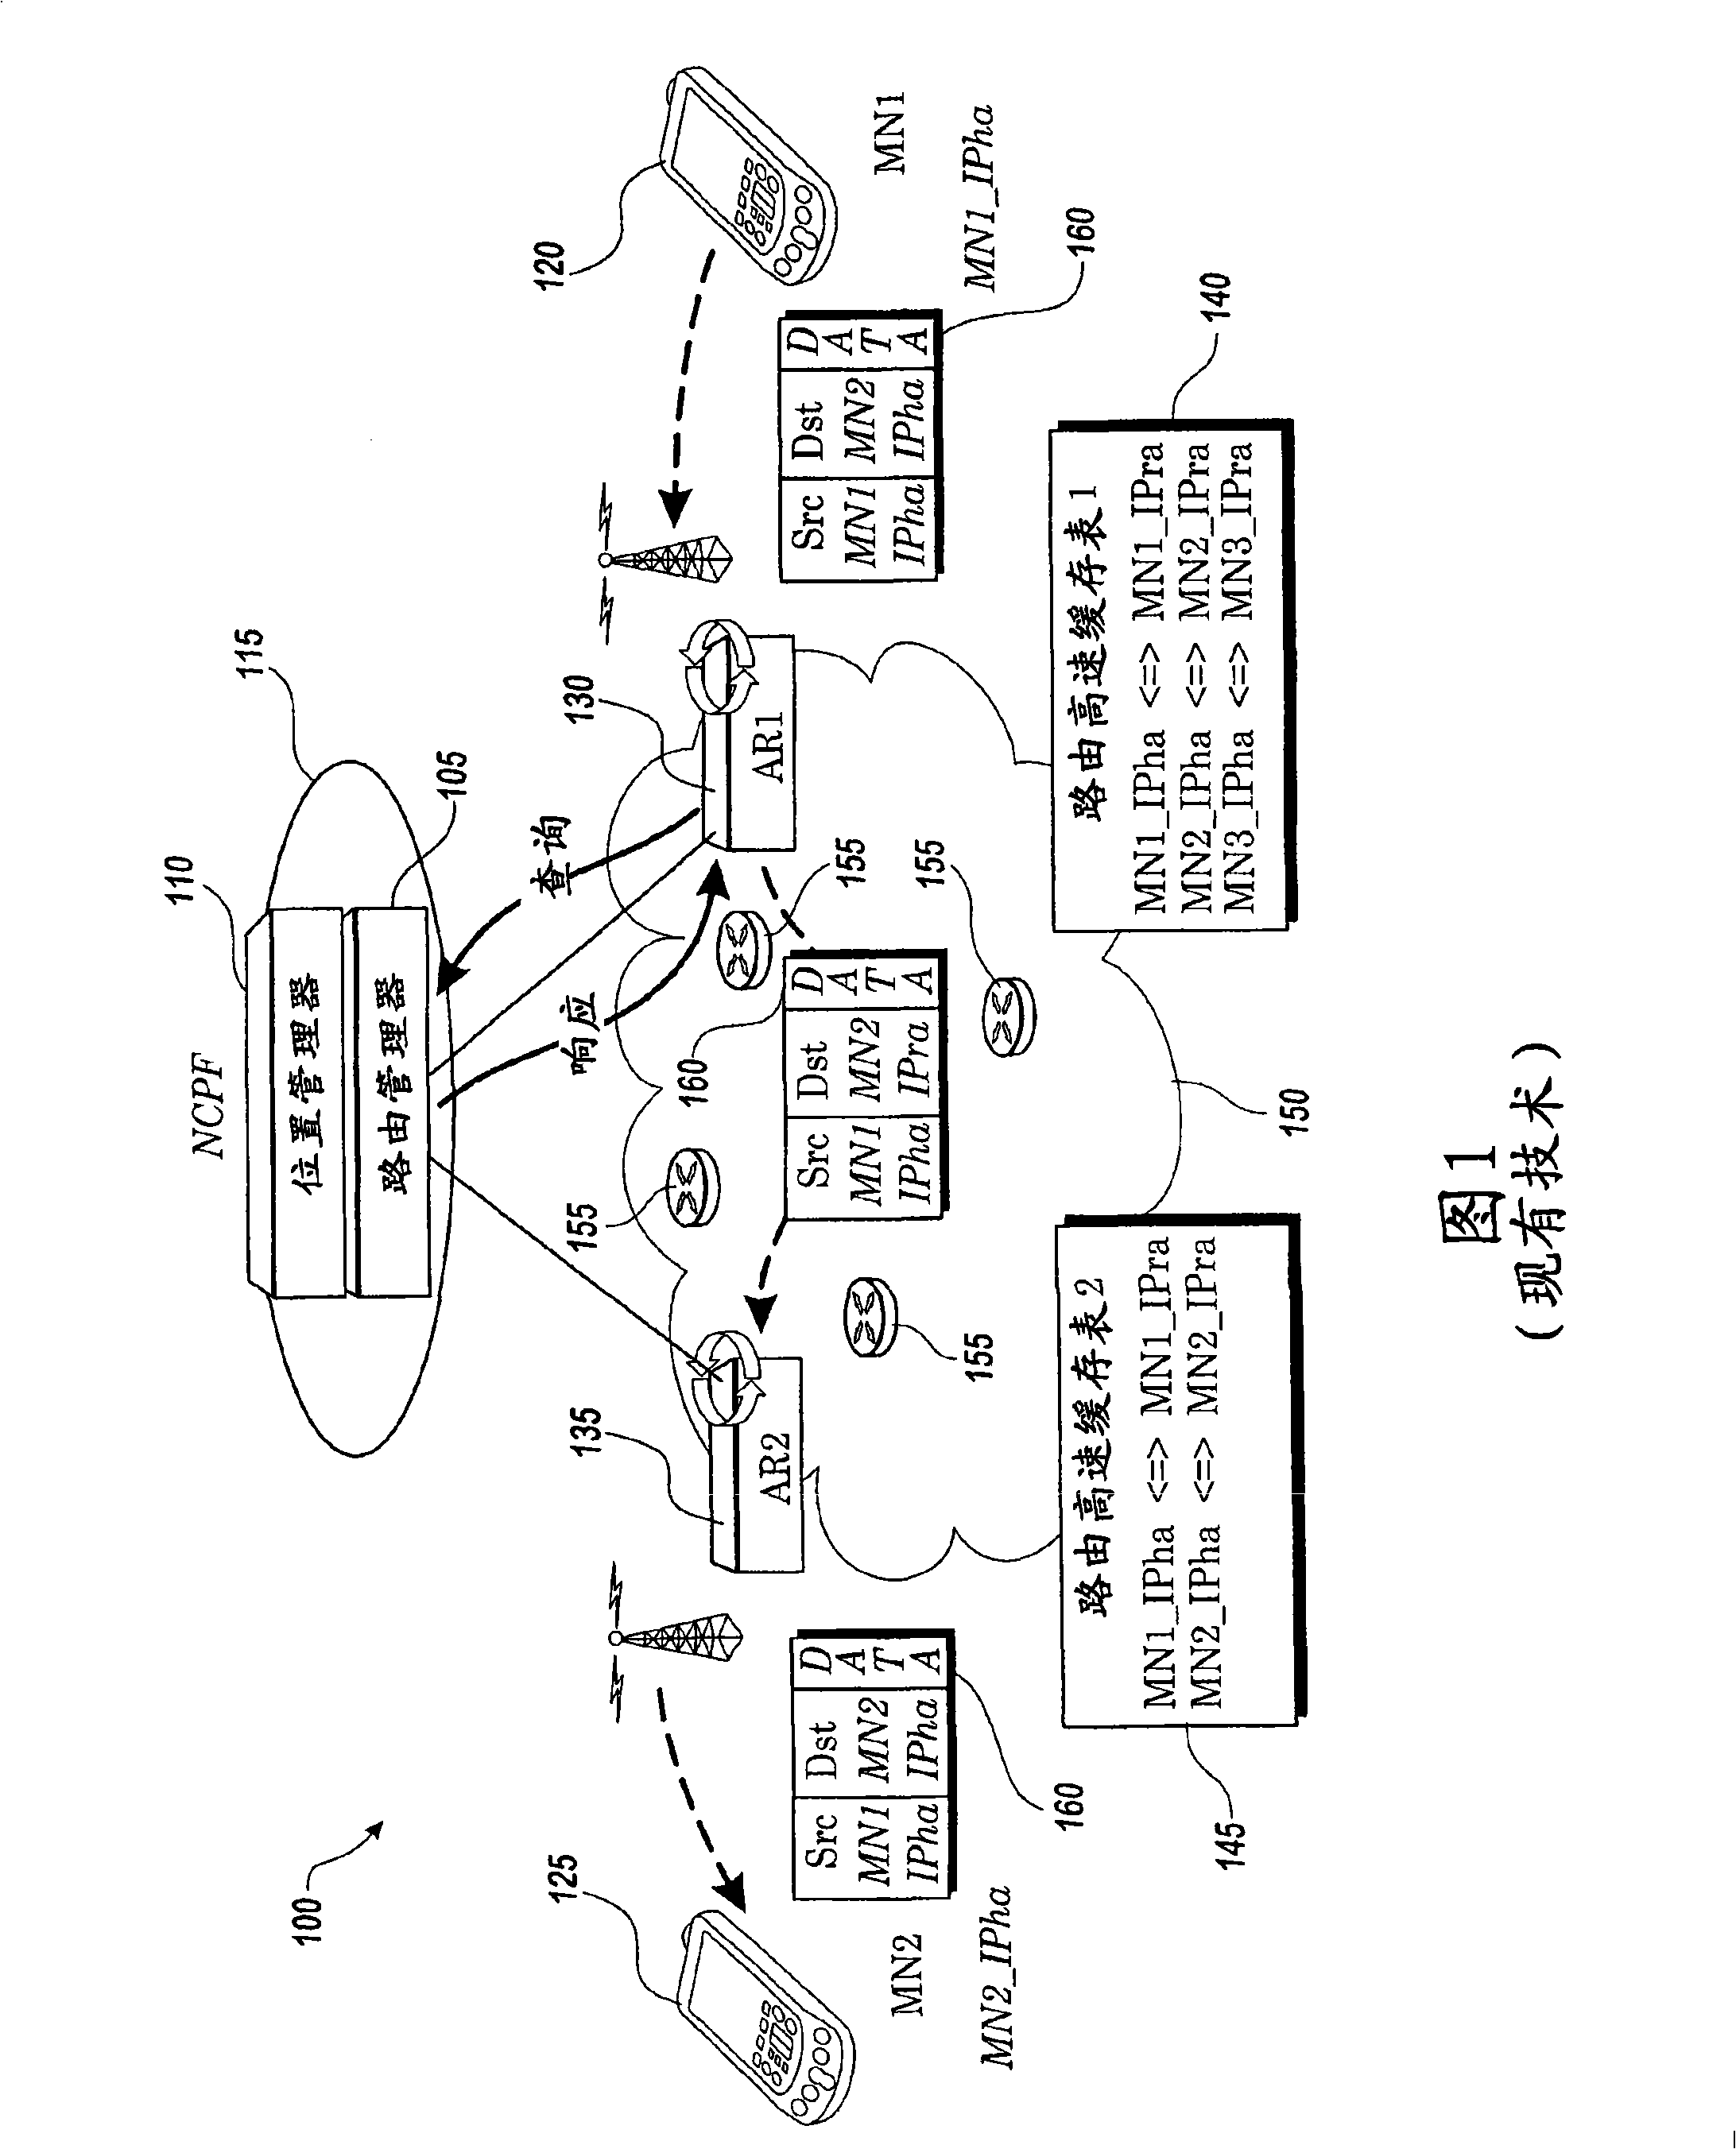 Method and system for SIP-based mobility management